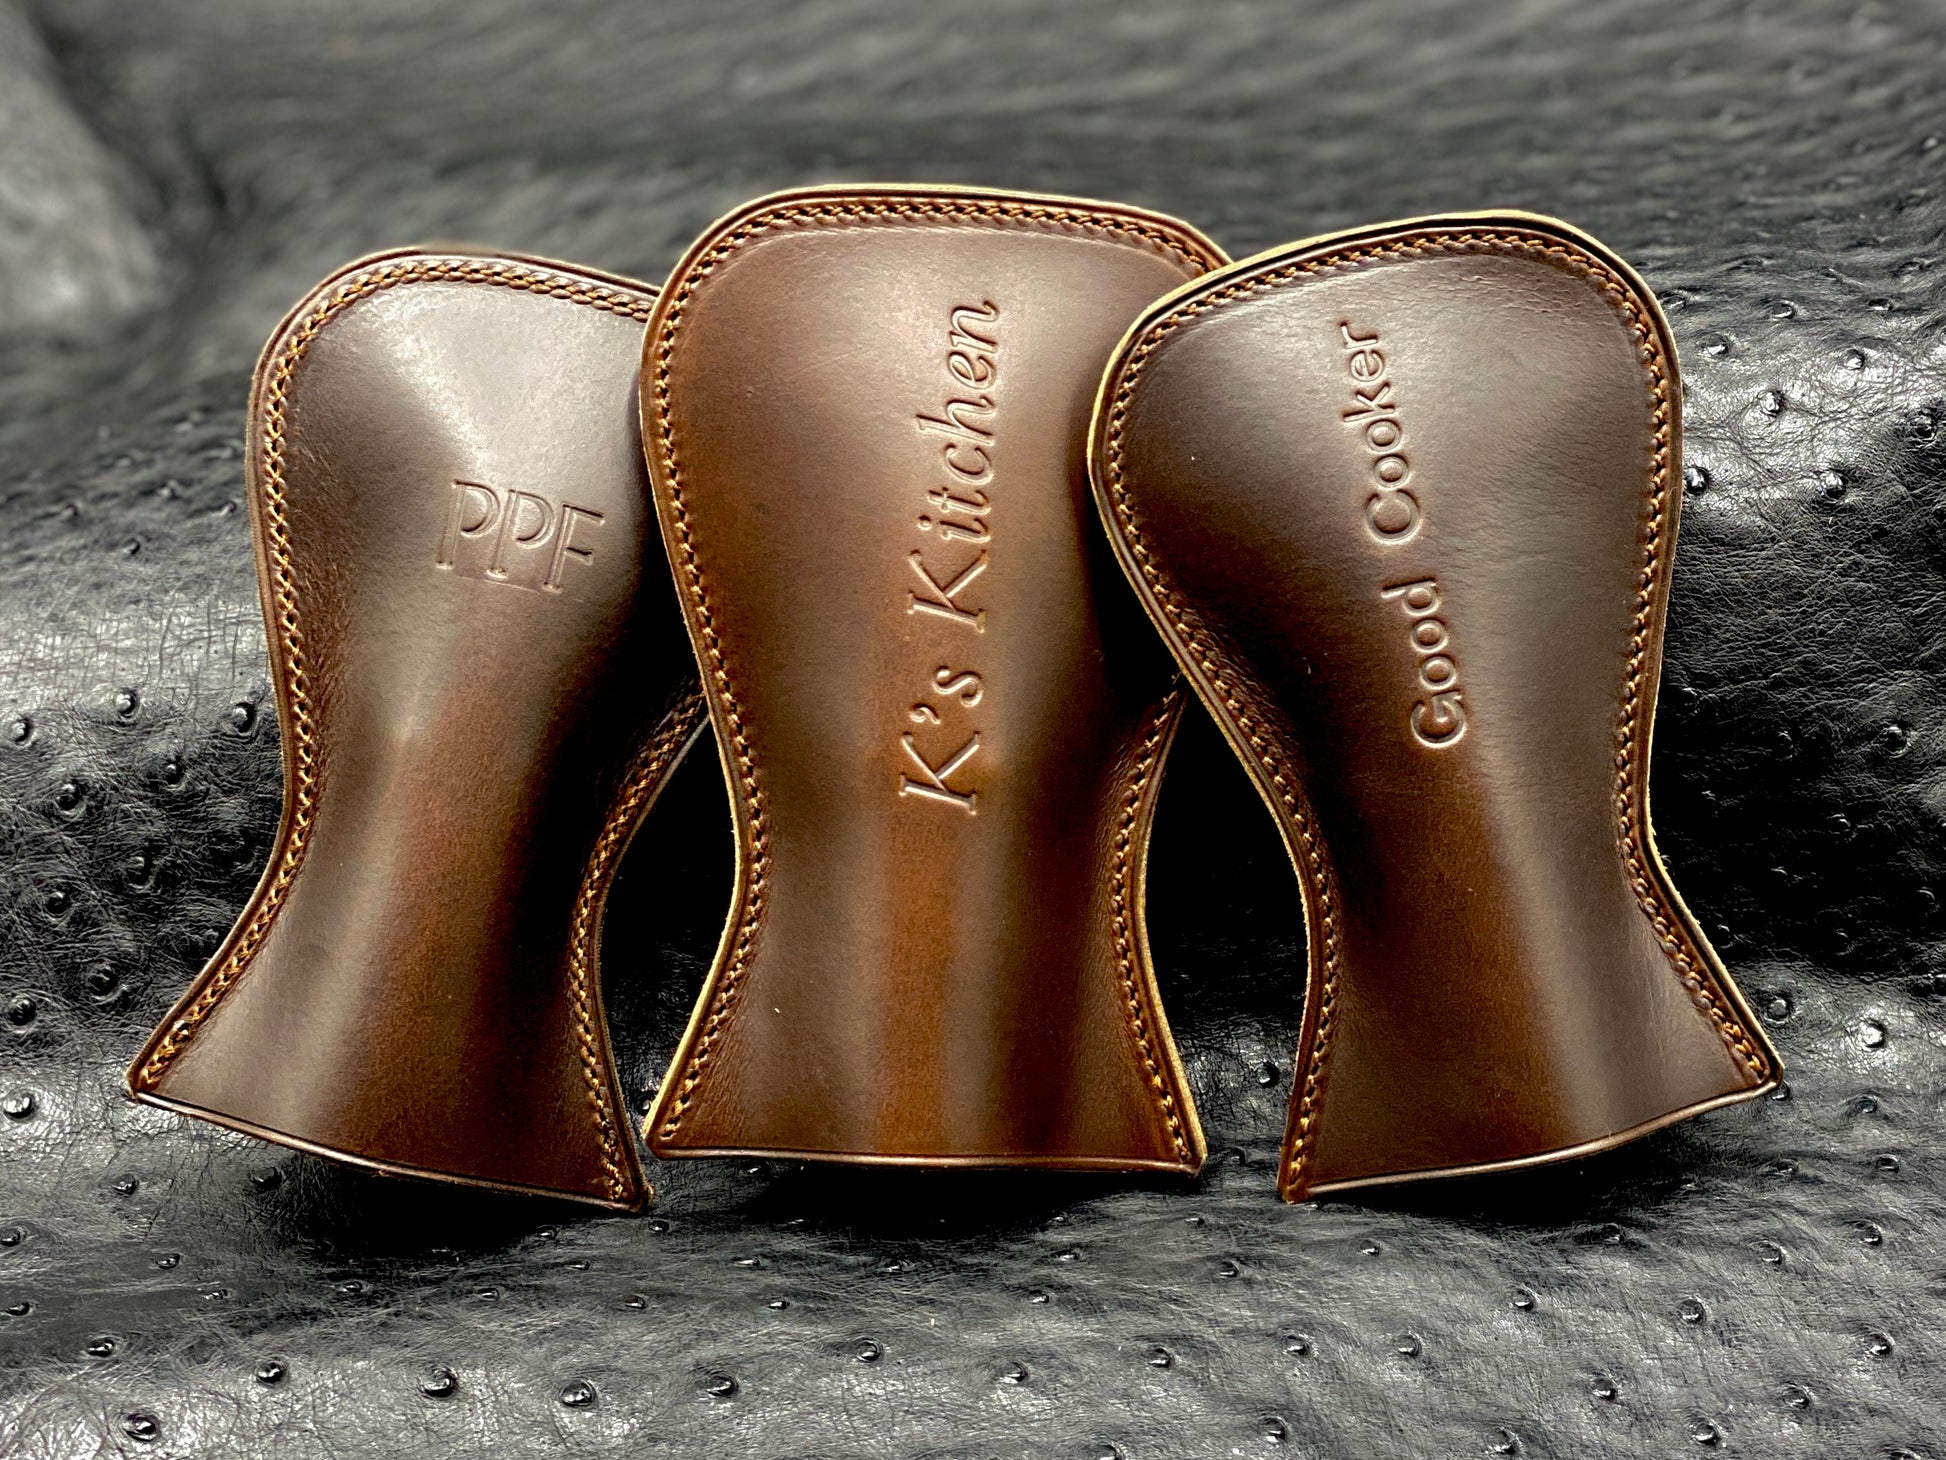 Beautiful Cast Iron Skillet Handle Covers in Horween leather.  Handmade to order in Houston, TX.